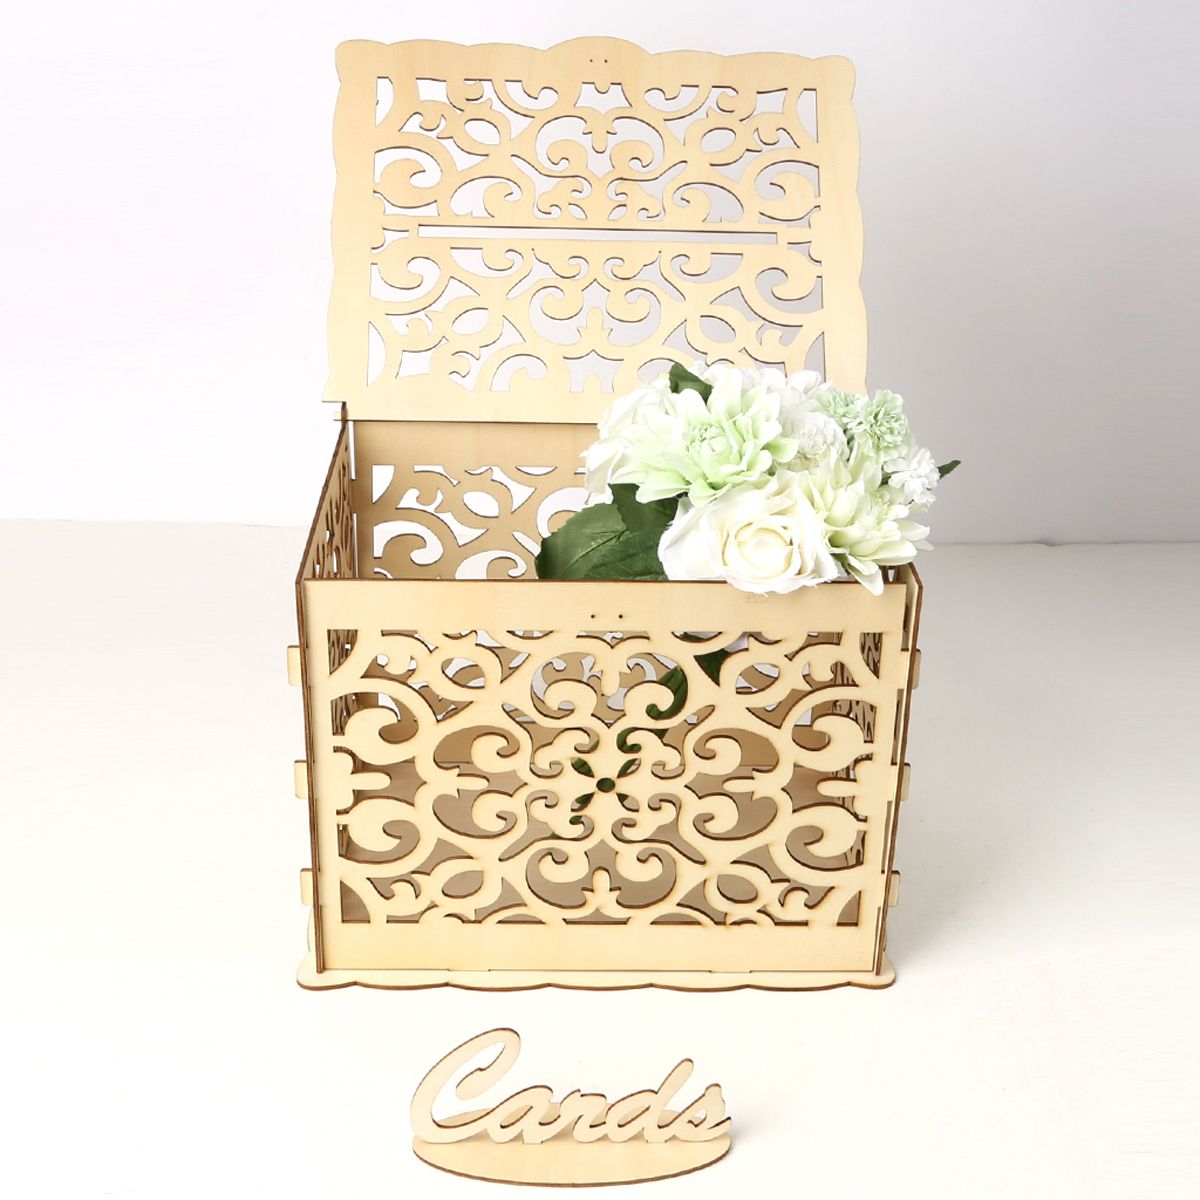 Greeting-Card-Box-Wedding-Decor-Supplies-Decorations-Wooden-Gift-Case-1475750